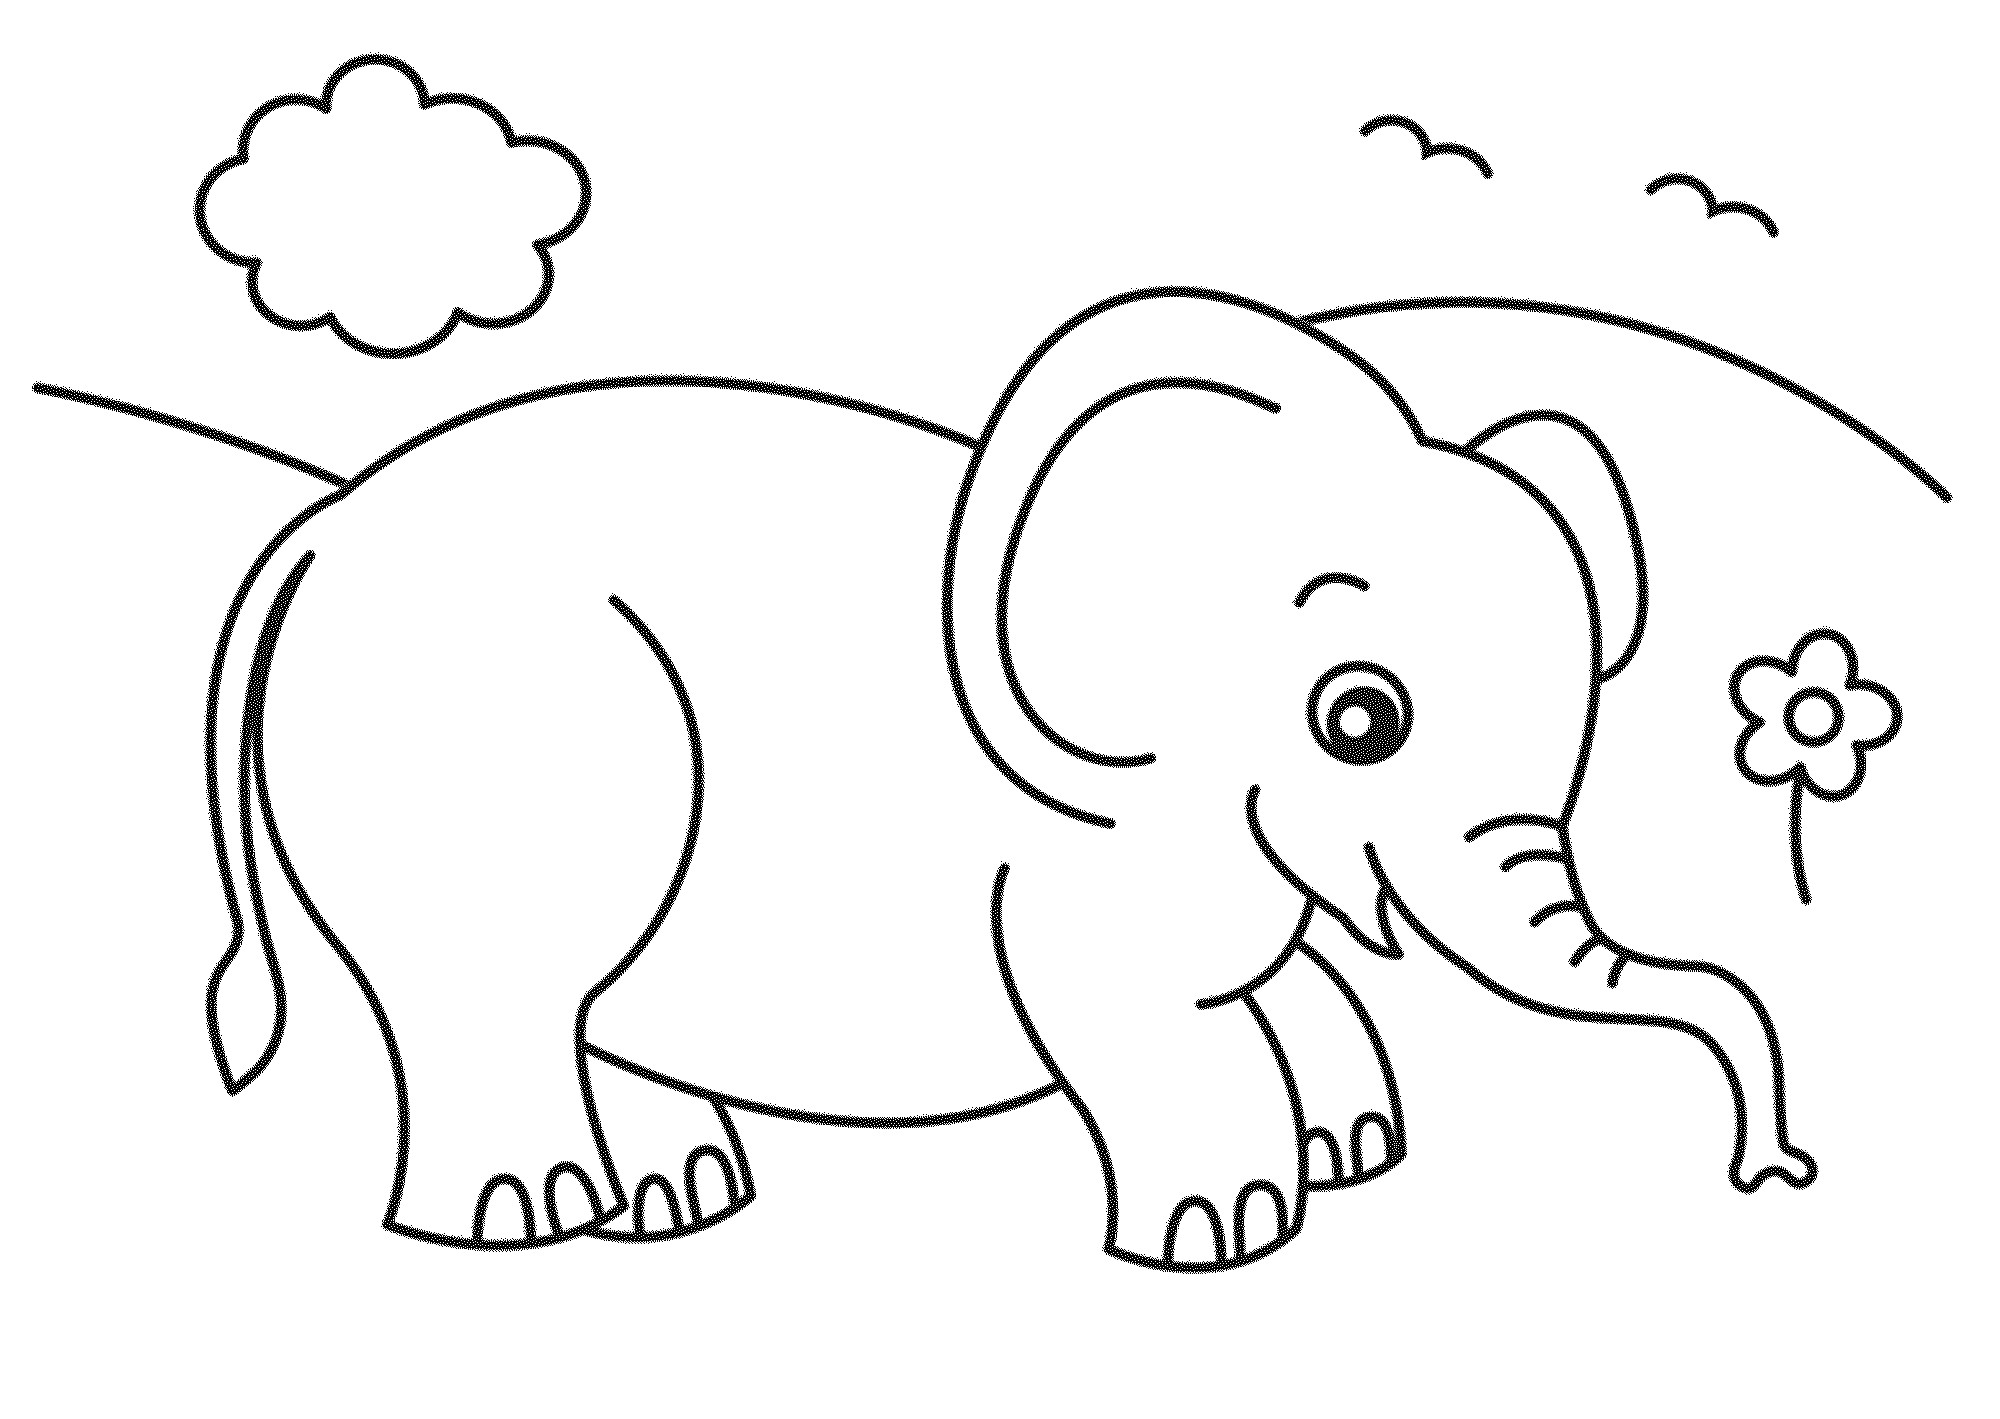 Cute Baby Elephant Coloring Pages
 Easy Elephant Coloring Pages Ideas For Beginners